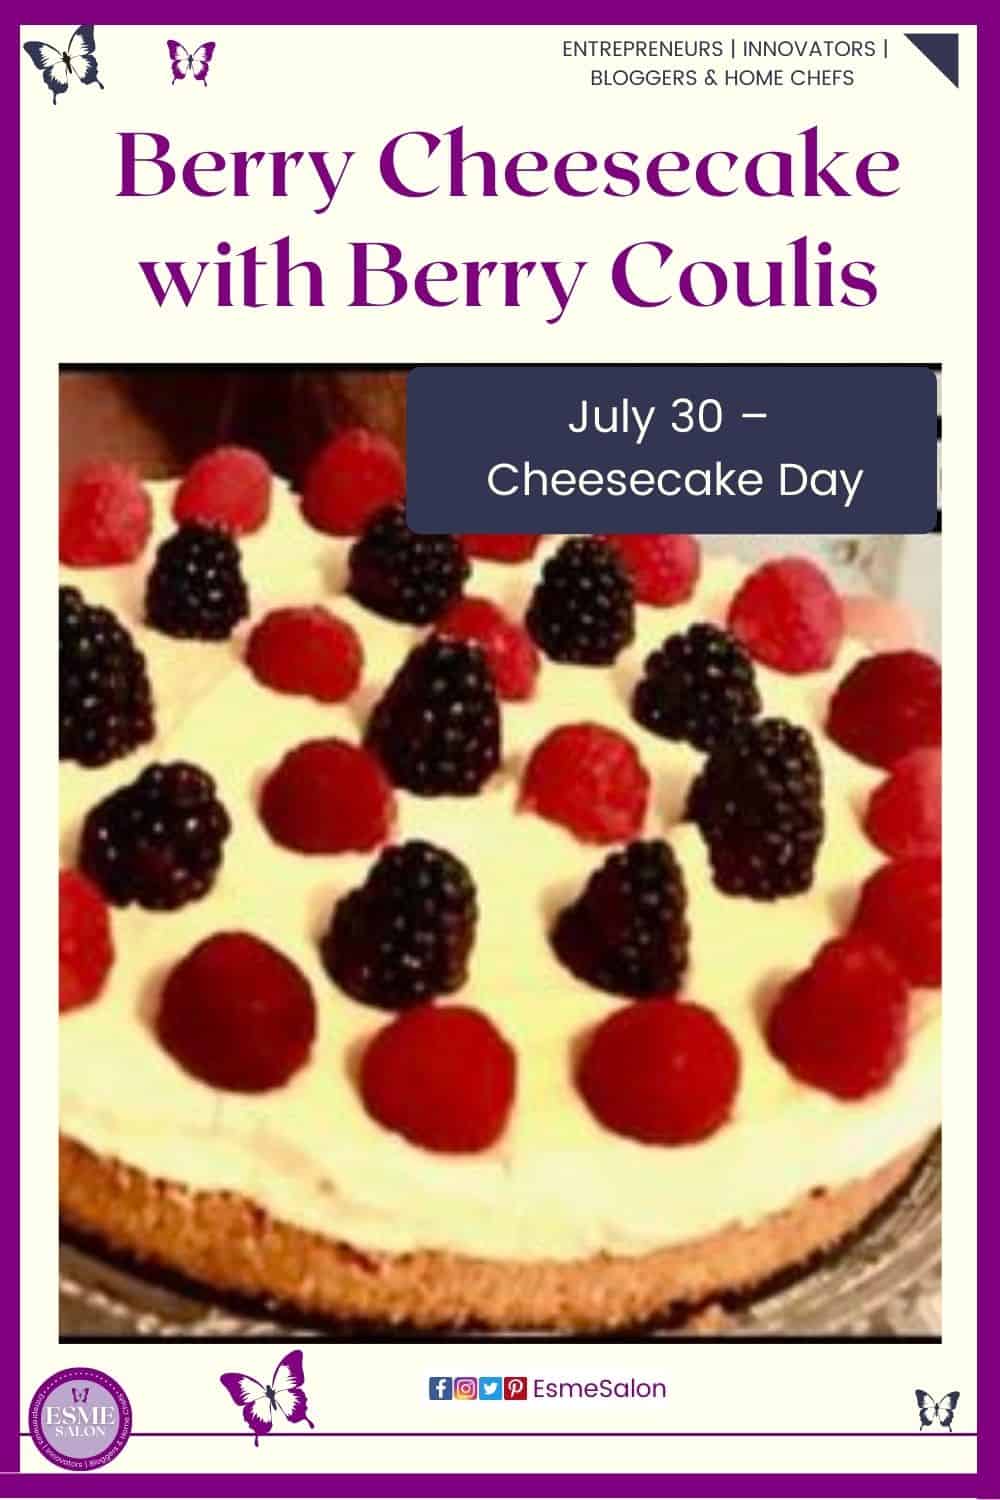 an image of a Berry Cheesecake with Berry Coulis decorated with black and red berries